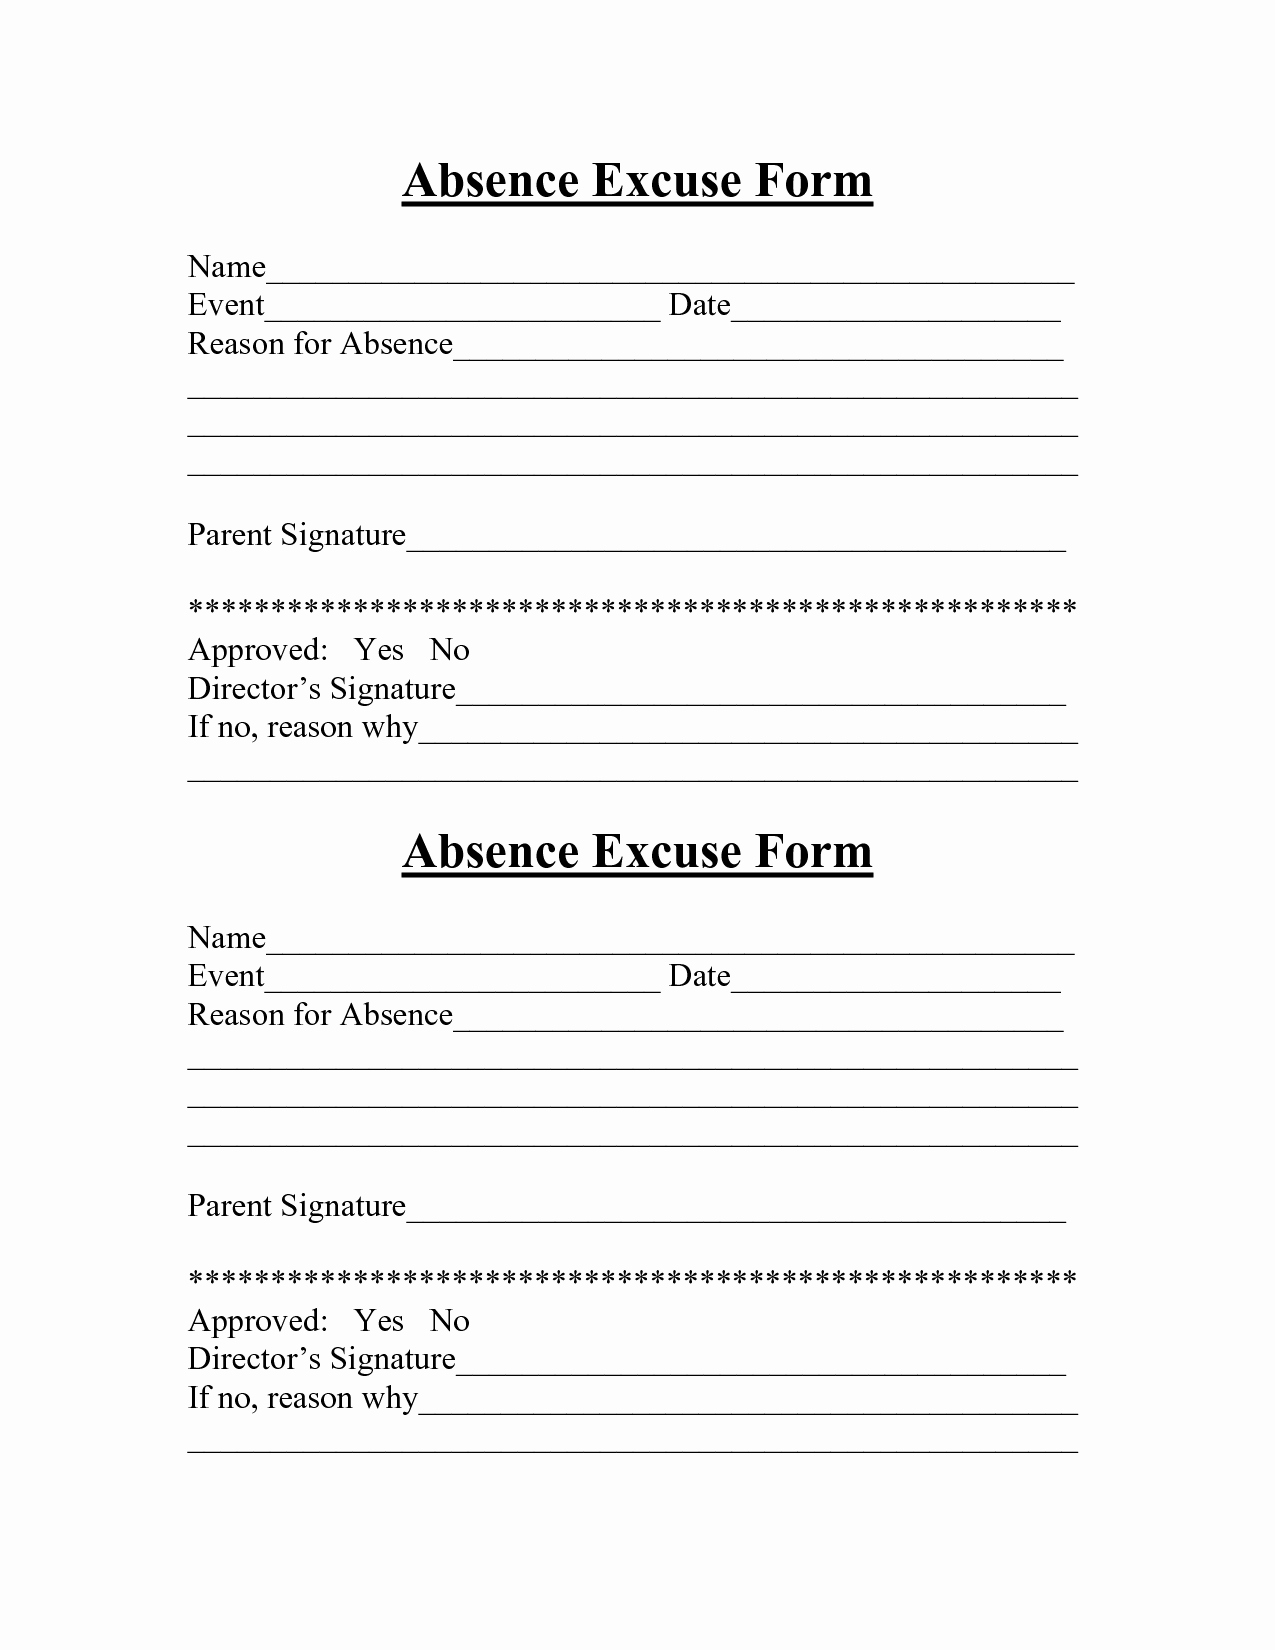 Employee Absence form Template Lovely formatted New Absentee forms and Templates